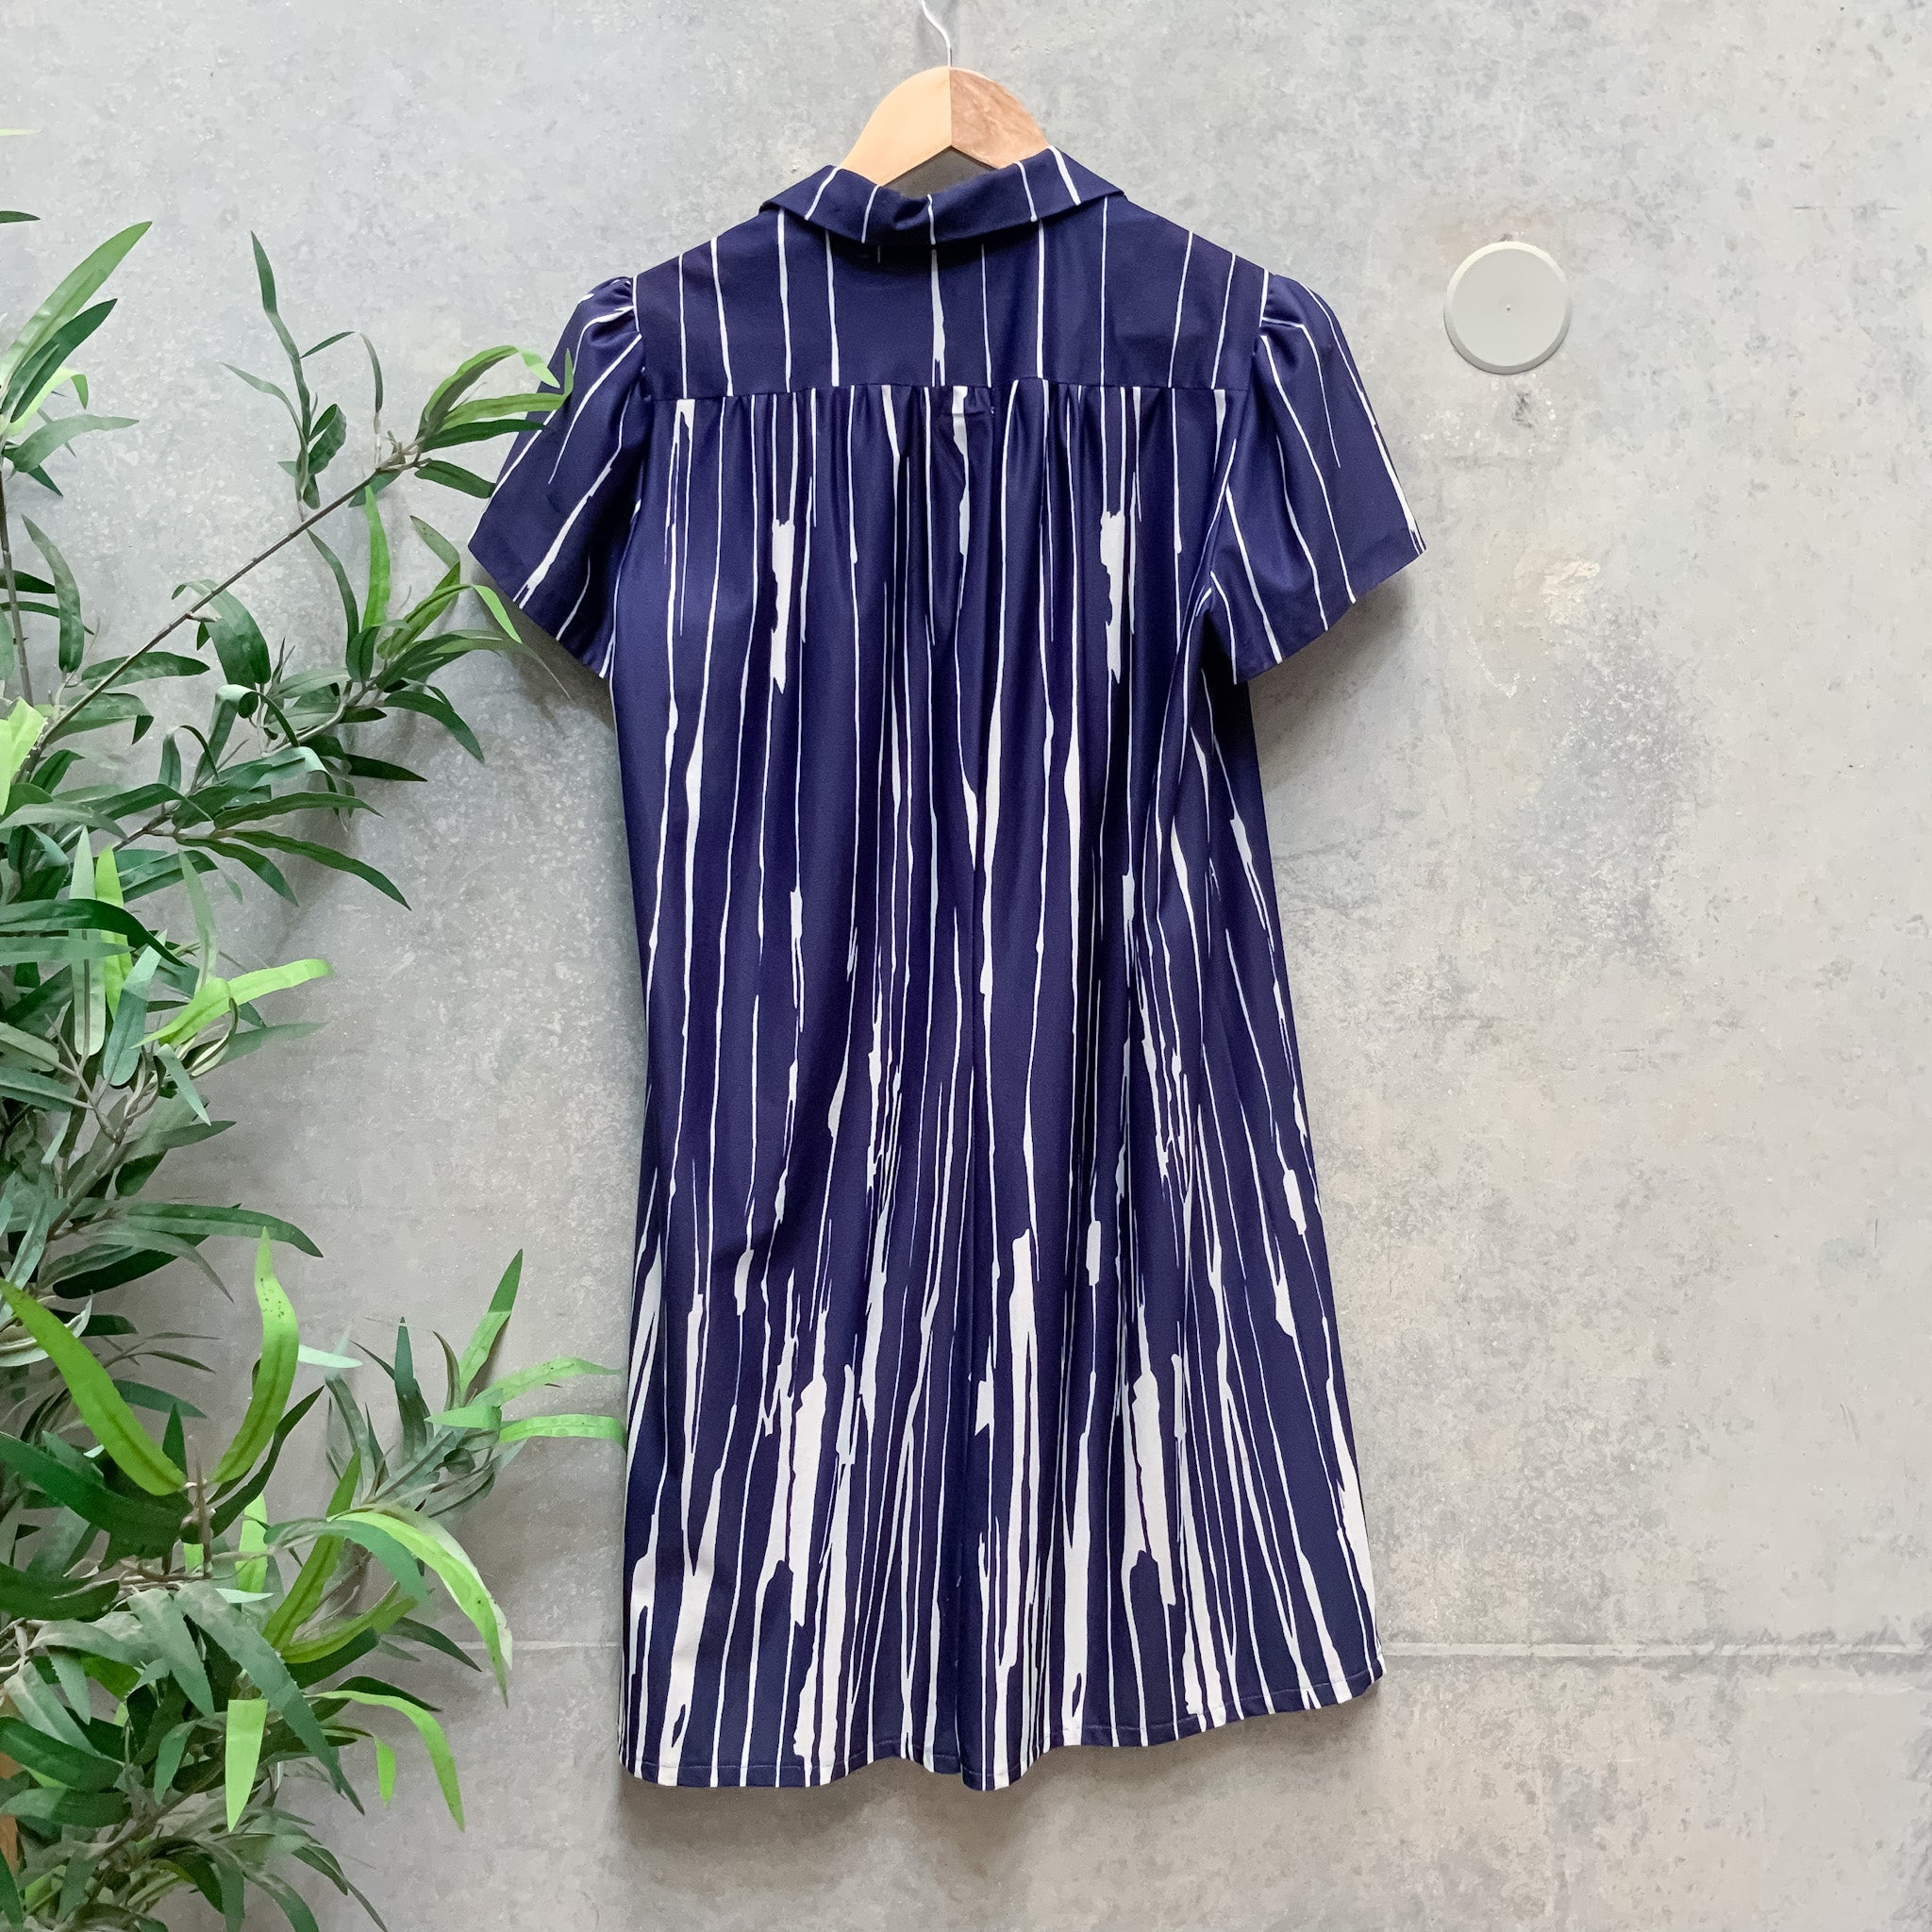 Vintage Ladies Navy Blue Abstract Striped Short Sleeved Polo Dress - Size L